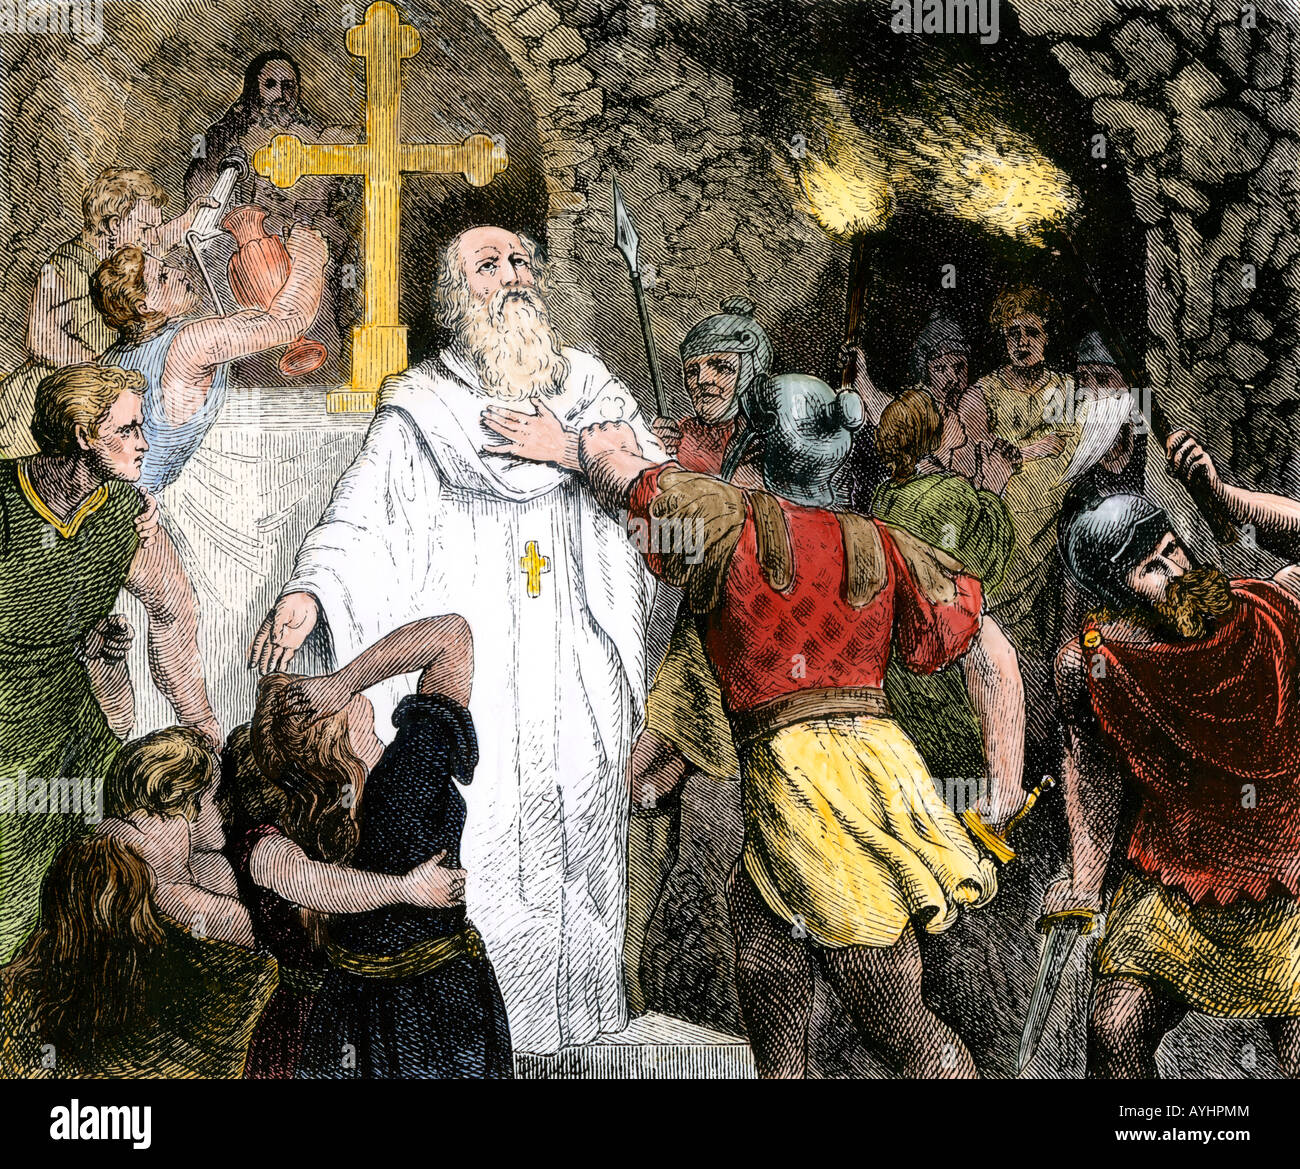 http://c8.alamy.com/comp/AYHPMM/christians-in-the-catacombs-arrested-by-roman-soldiers-AYHPMM.jpg